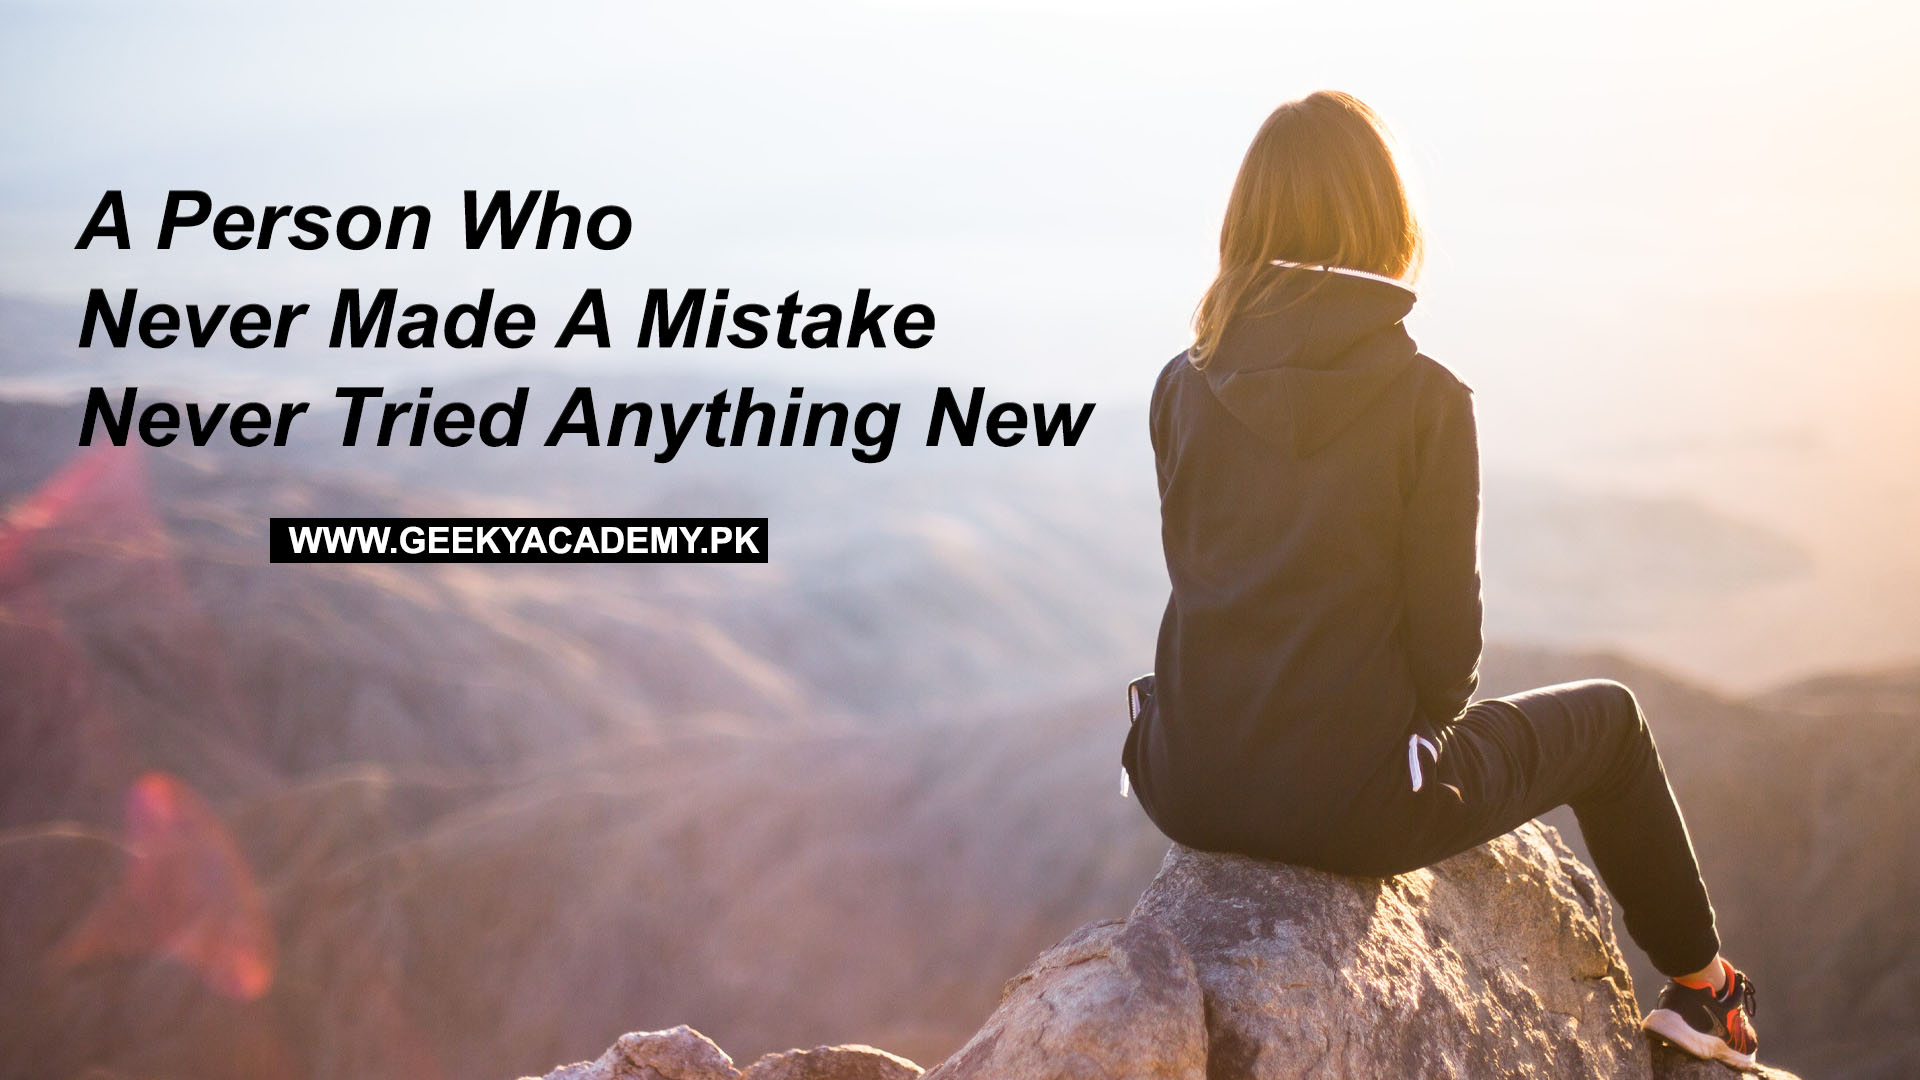 motivational quotes - A Person Who Never Made A Mistake Never Tried Anything New